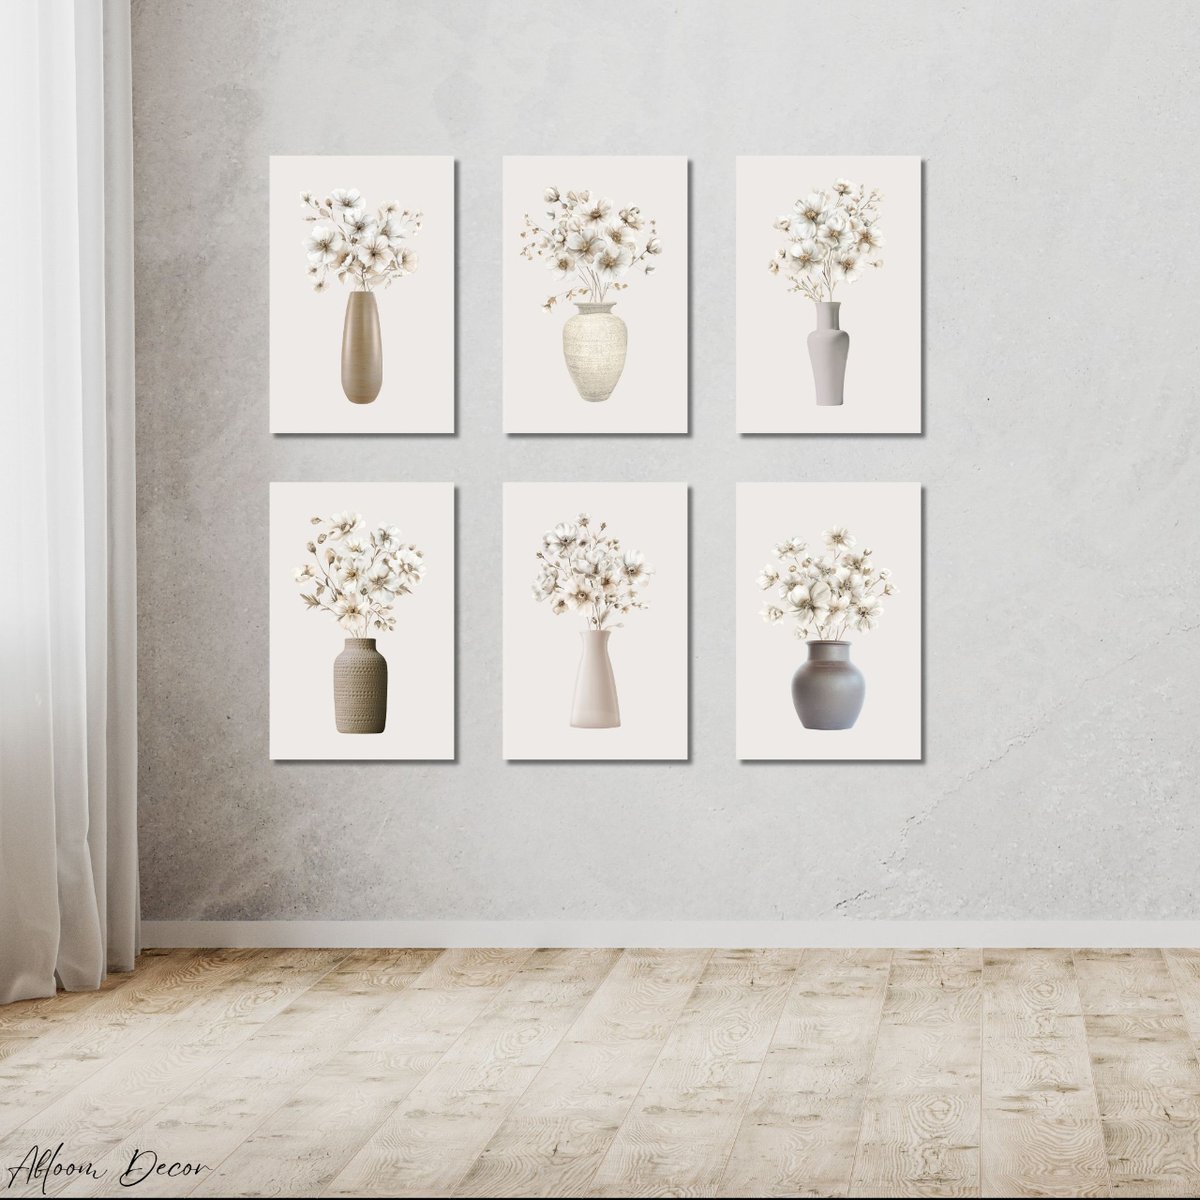 If you love flowers and a neutral color palette, this set of six FREE white rustic flower wall art printables is perfect for you! abloomdecor.com/white-rustic-f… #freeprintables #livingroomwallart #floralwallart #walldecor